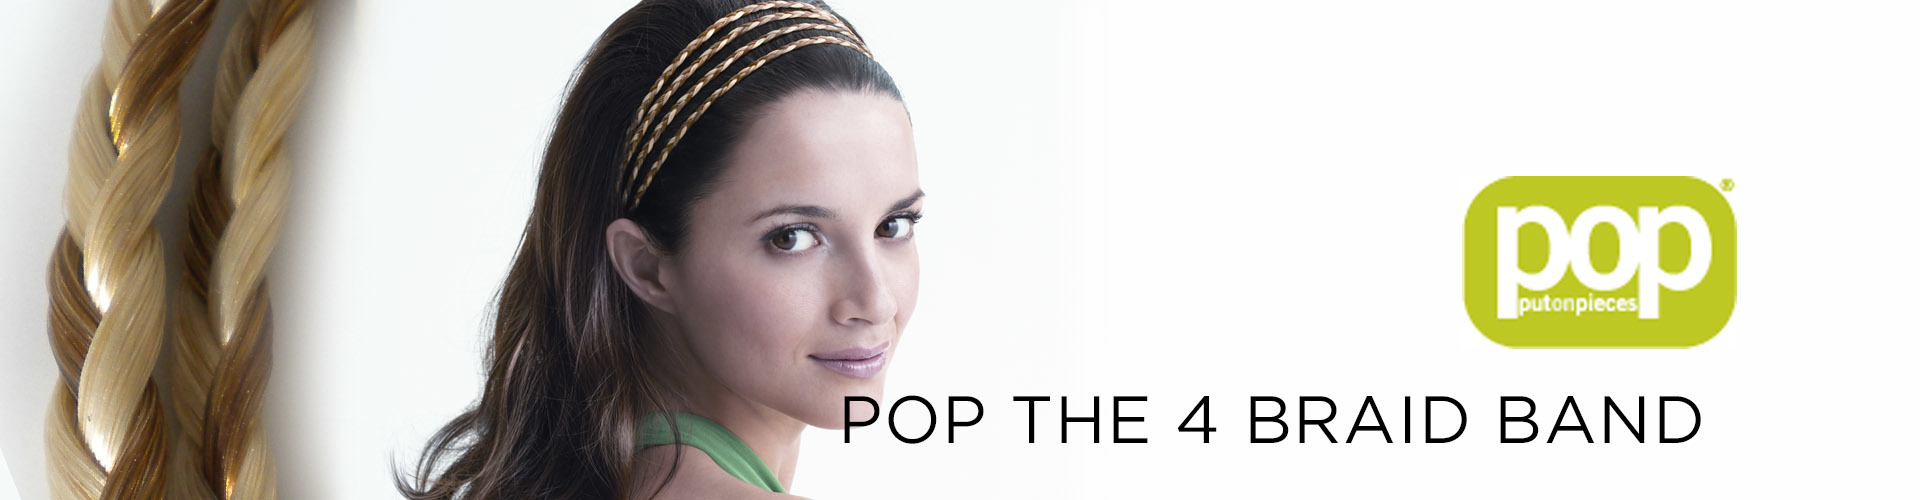 POP The 4 Braid Band (© Great Lengths)